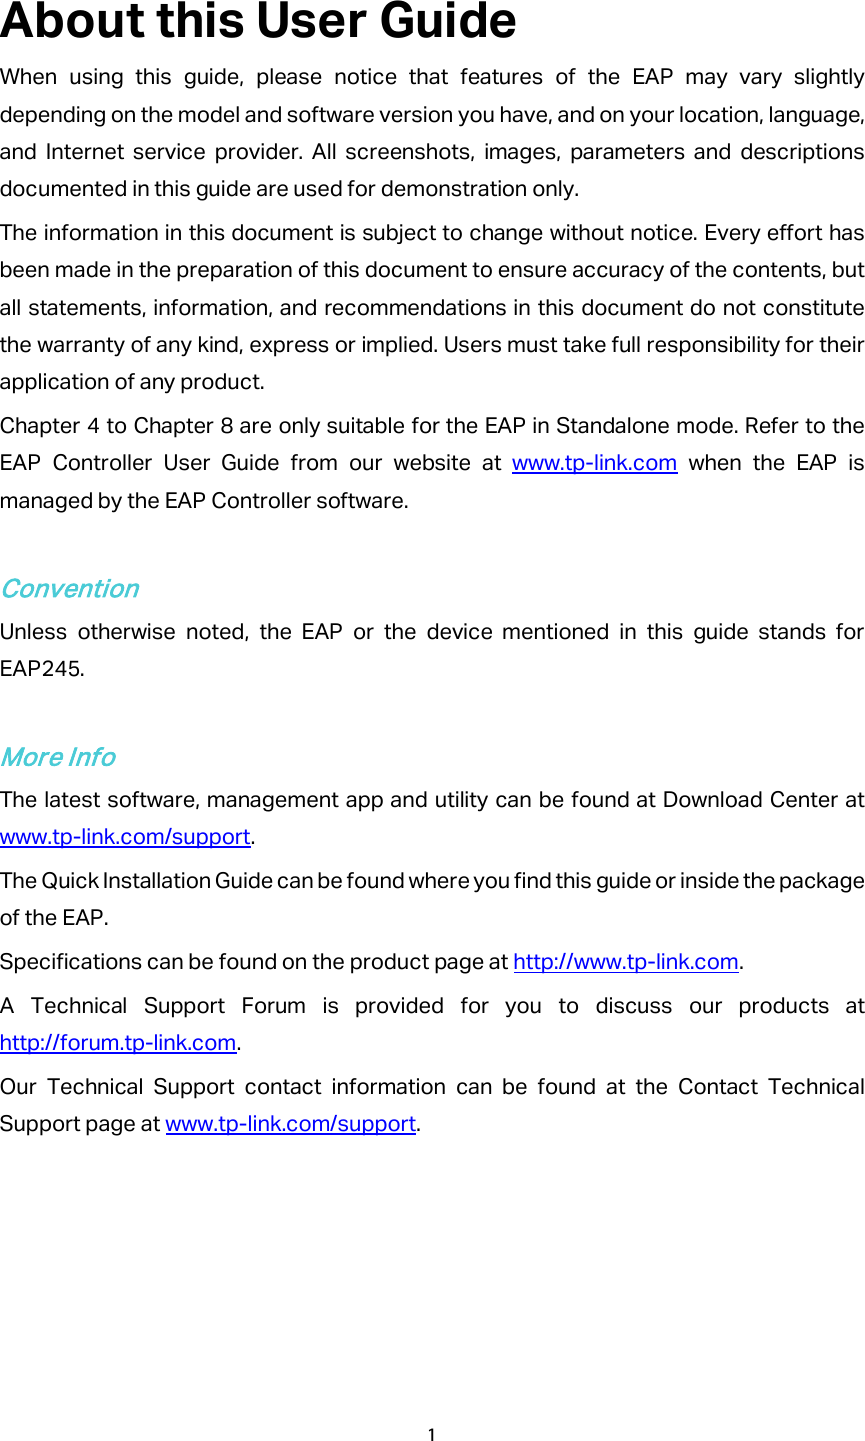 About this User Guide When using this guide, please notice that features of the EAP may vary slightly depending on the model and software version you have, and on your location, language, and Internet service provider. All screenshots, images, parameters and descriptions documented in this guide are used for demonstration only. The information in this document is subject to change without notice. Every effort has been made in the preparation of this document to ensure accuracy of the contents, but all statements, information, and recommendations in this document do not constitute the warranty of any kind, express or implied. Users must take full responsibility for their application of any product. Chapter 4 to Chapter 8 are only suitable for the EAP in Standalone mode. Refer to the EAP Controller User Guide from our website at www.tp-link.com when the EAP is managed by the EAP Controller software.  Convention Unless otherwise noted, the EAP or the device mentioned in this guide stands for EAP245.    More Info The latest software, management app and utility can be found at Download Center at www.tp-link.com/support. The Quick Installation Guide can be found where you find this guide or inside the package of the EAP. Specifications can be found on the product page at http://www.tp-link.com. A Technical Support Forum is provided for you to discuss our products at http://forum.tp-link.com. Our Technical Support contact information can be found at the Contact Technical Support page at www.tp-link.com/support.   1  